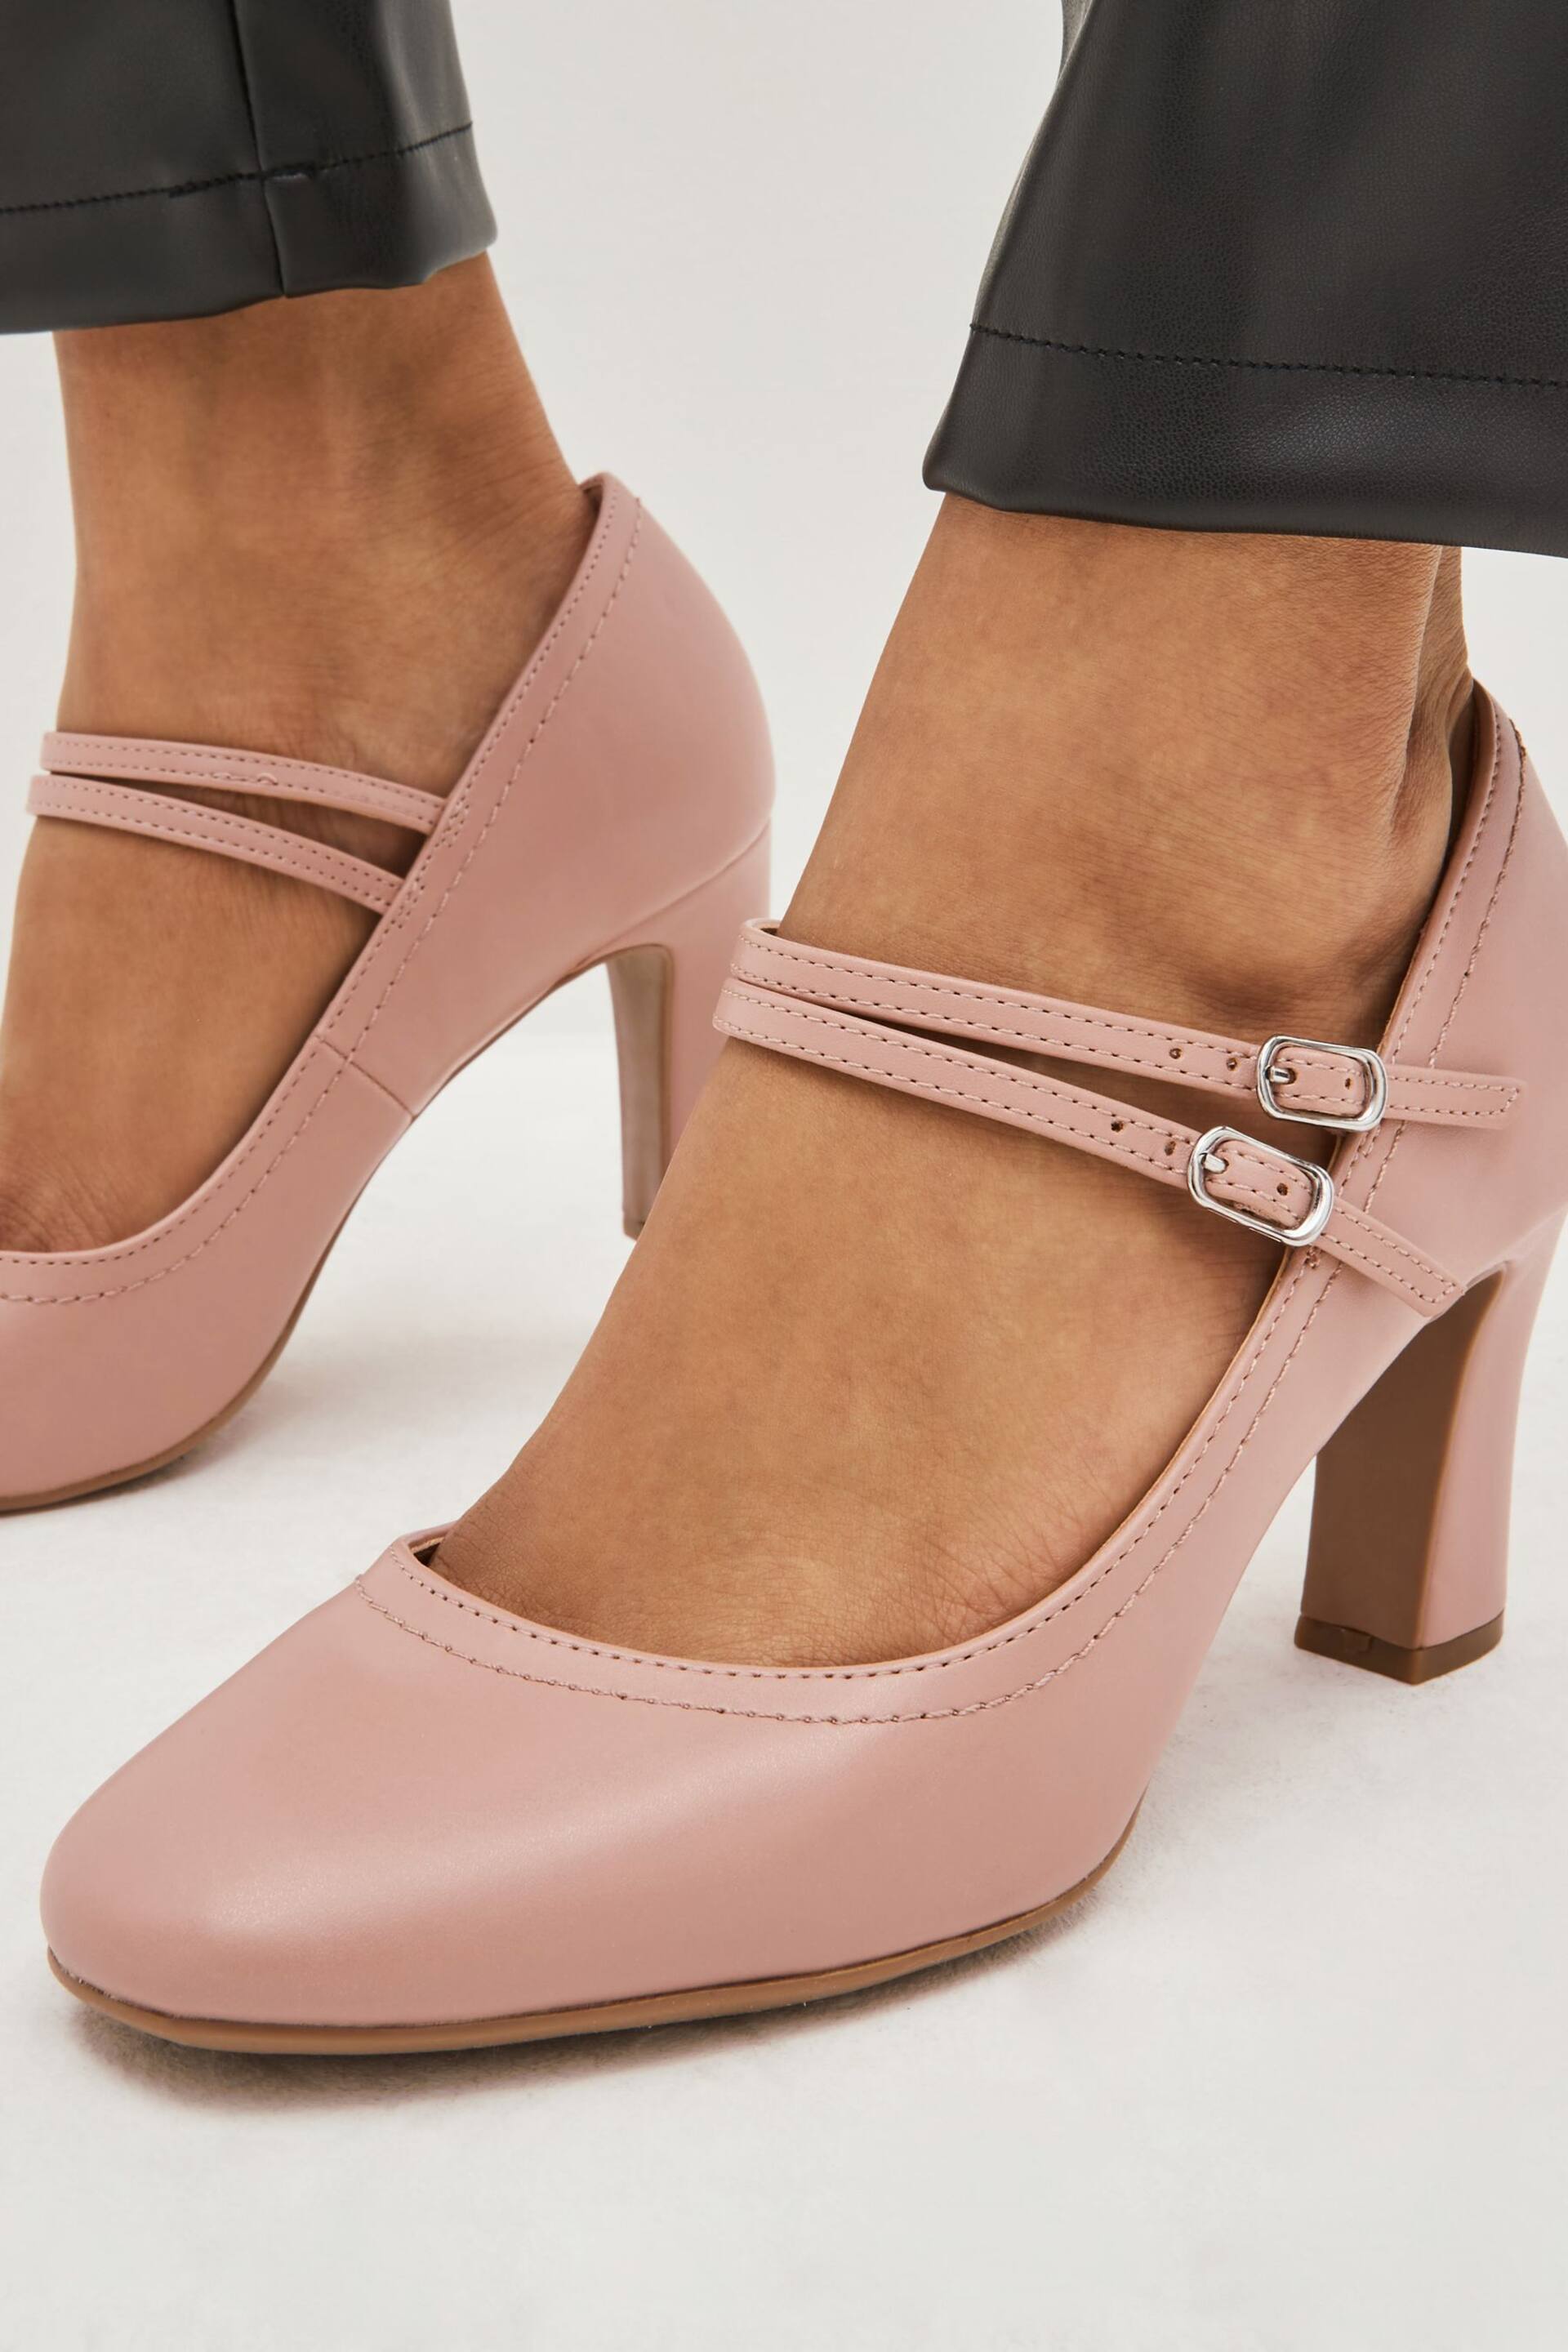 Nude Pink Regular/Wide Fit Forever Comfort® Mary Jane Shoes - Image 2 of 6